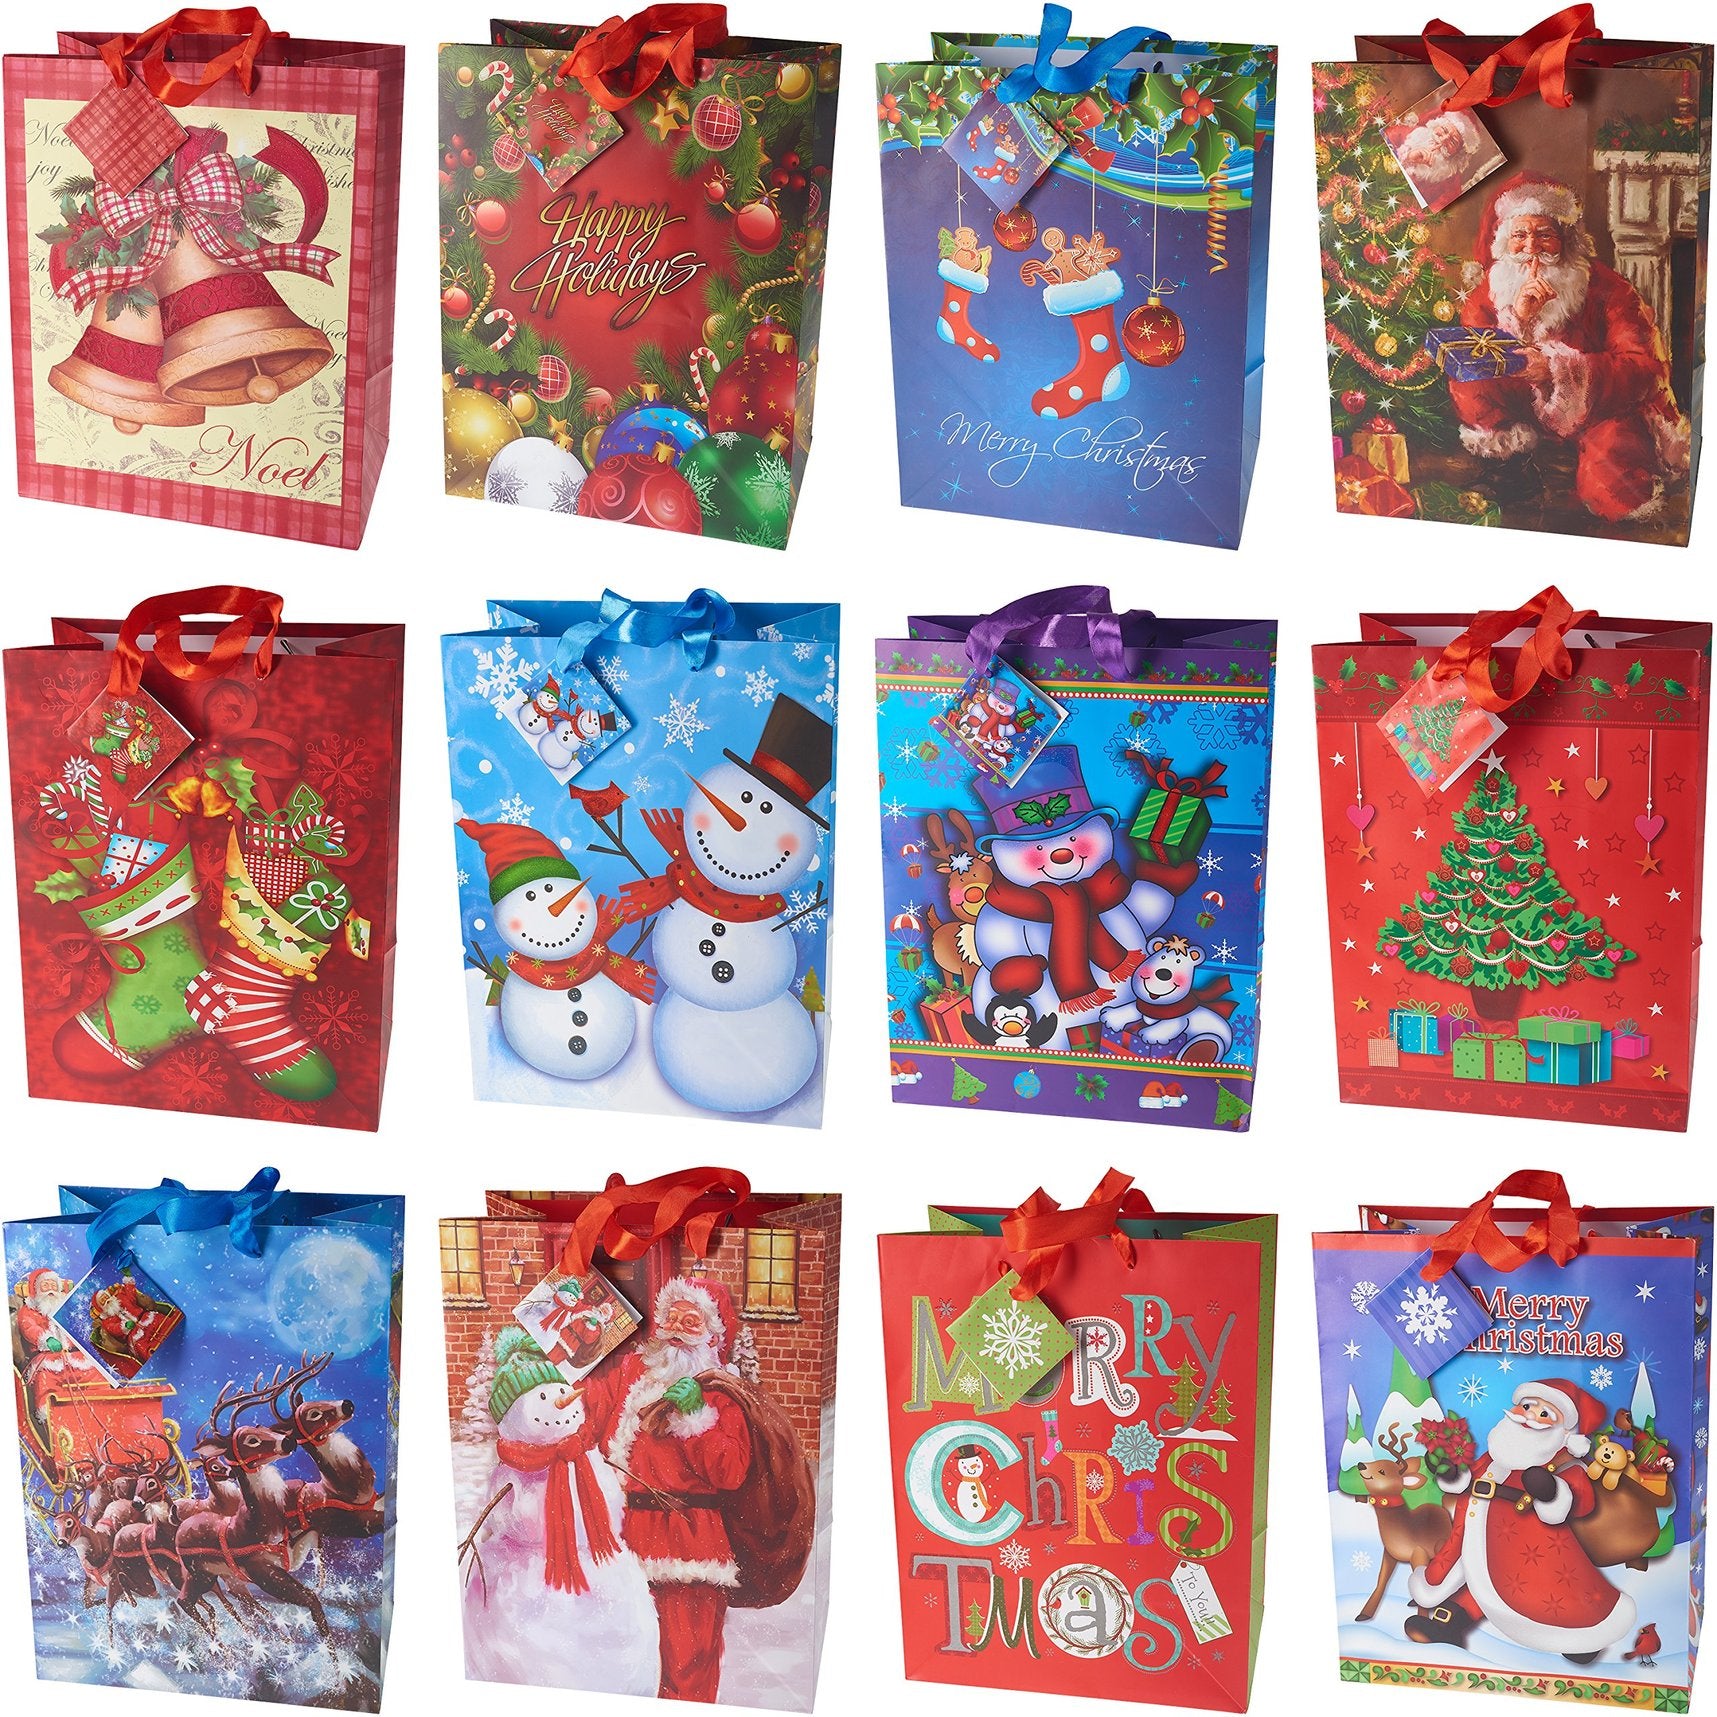 PREXTEX 12 Assorted 13 Inch Christmas Gift Bags: bulk tissue paper bags large size in assorted bright prints christmas bags for gifts party favors